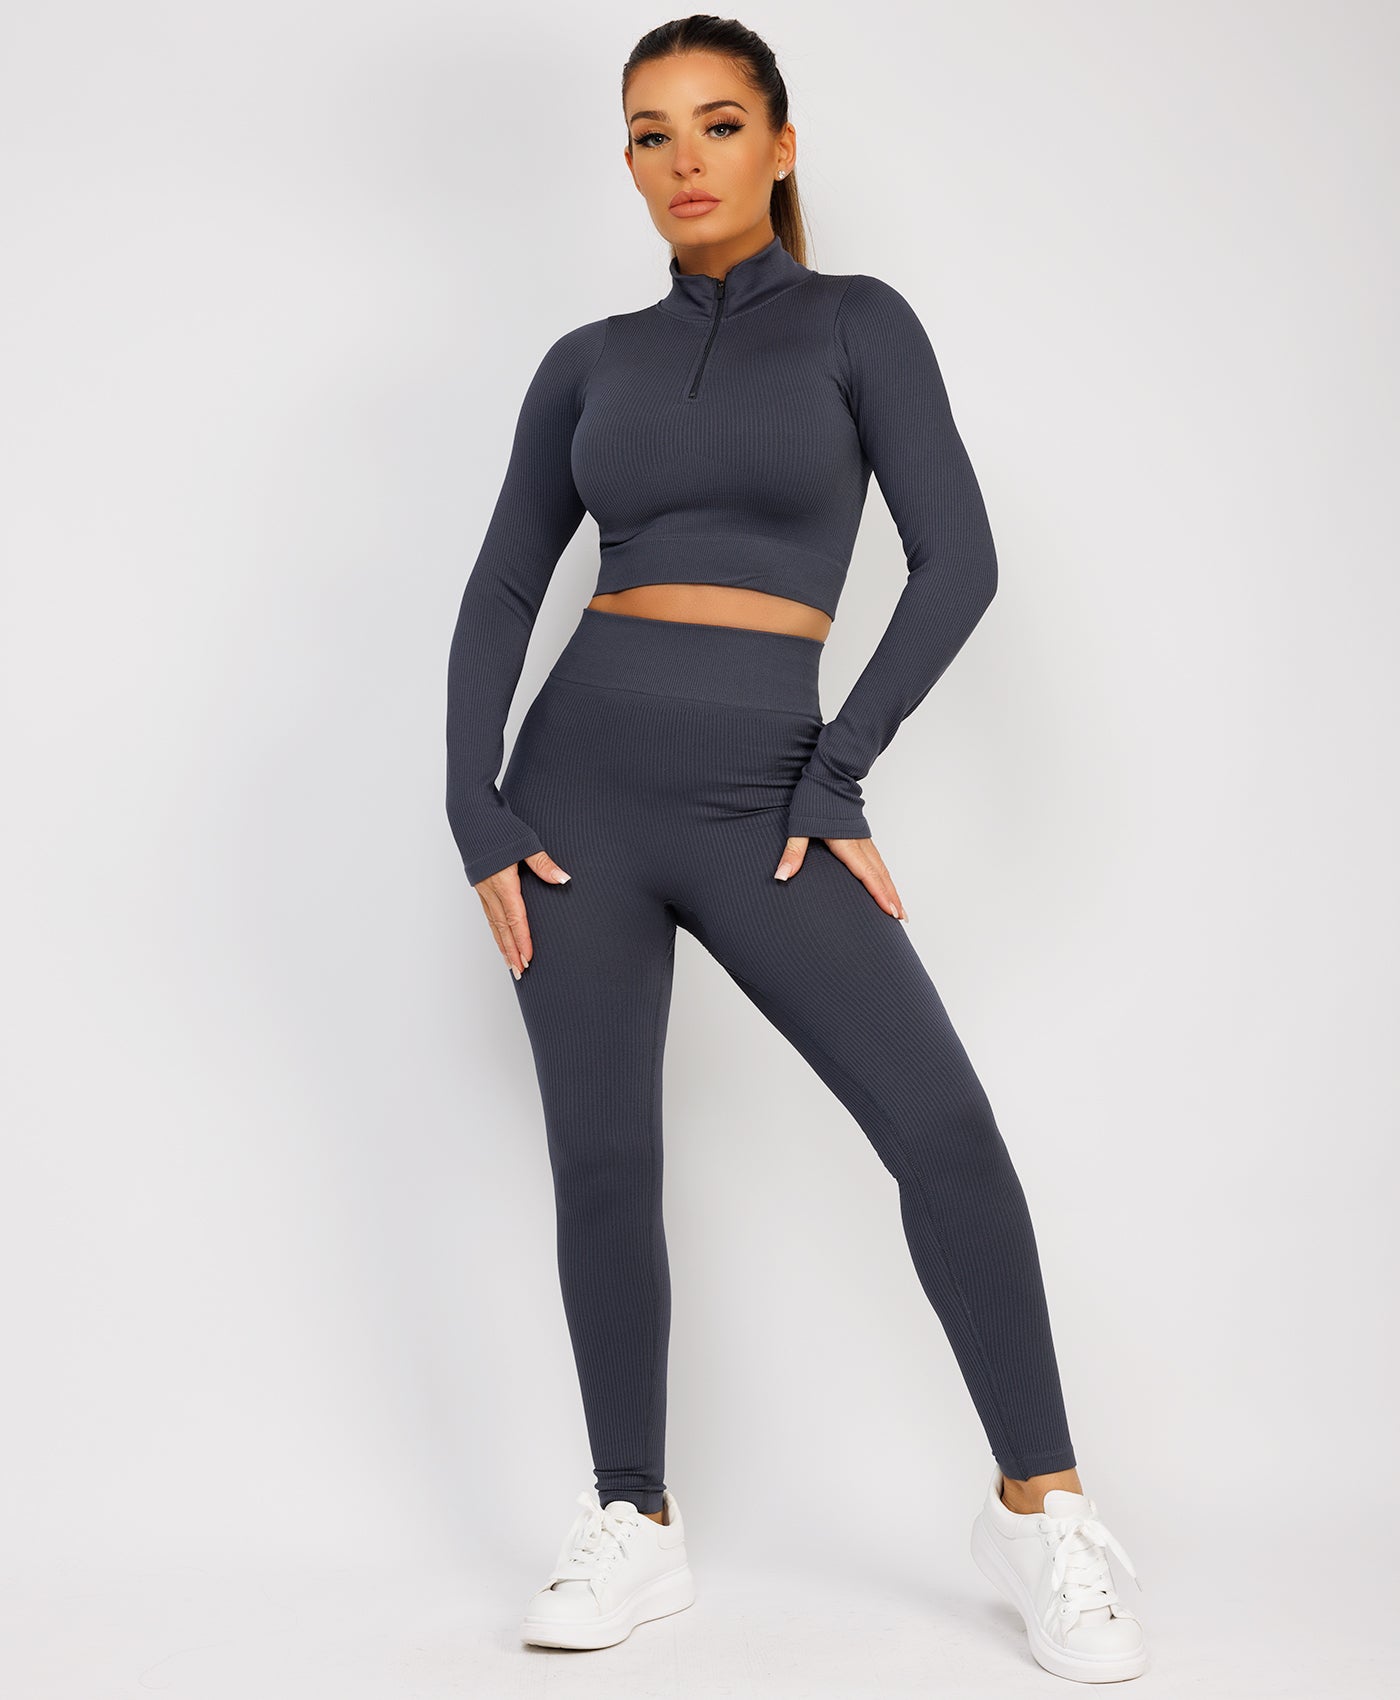 Charcoal-Grey-Zipped-Neck-Ribbed-Activewear-9